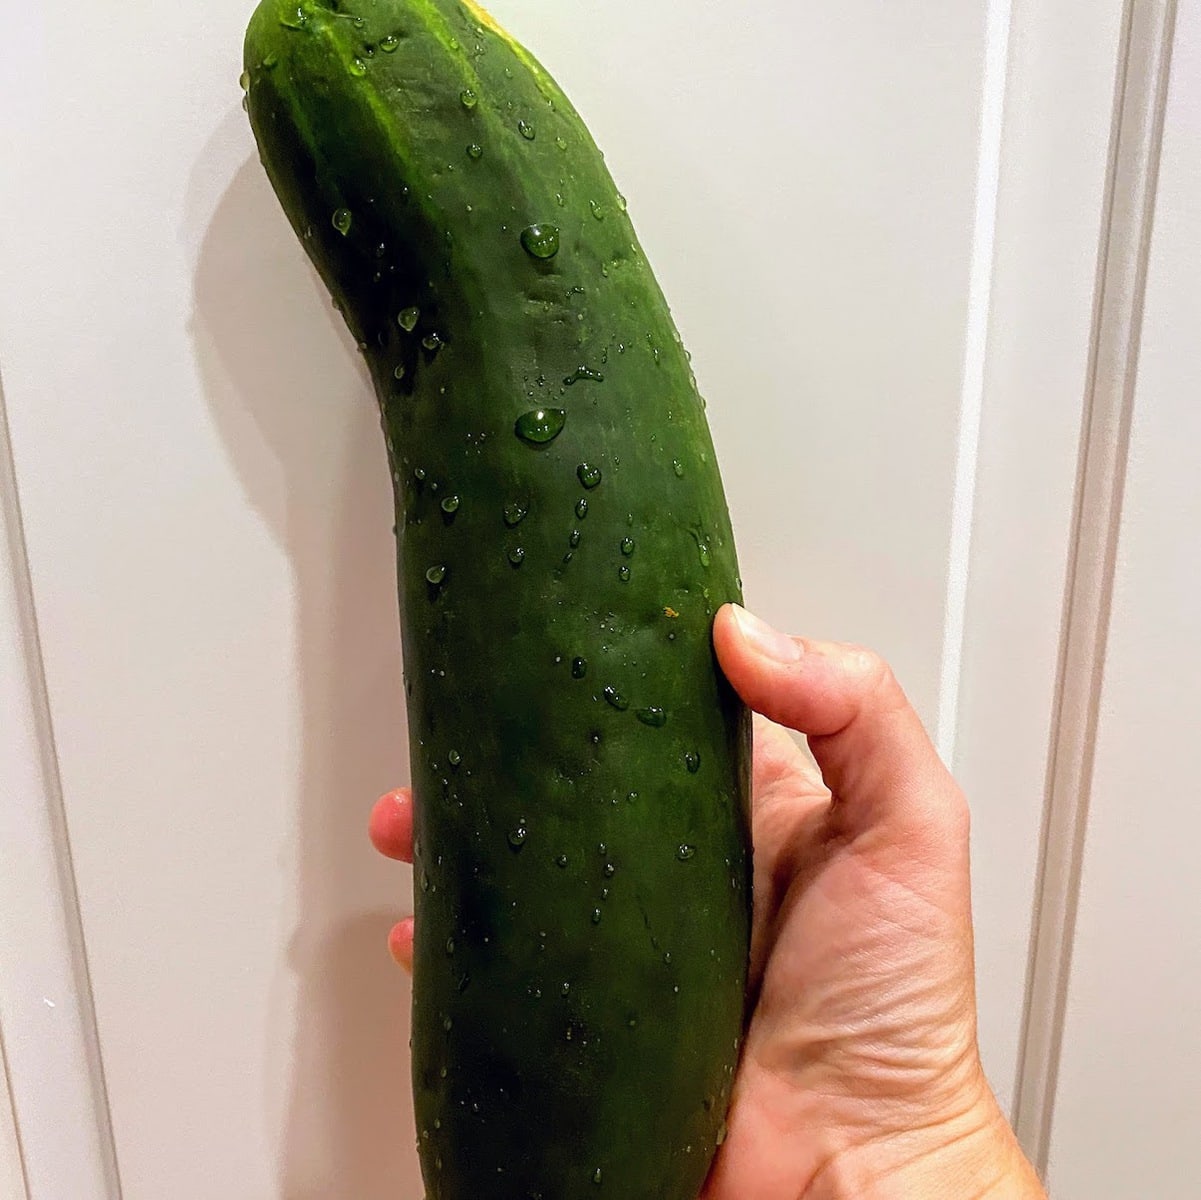 a hand holding a large green cucumber